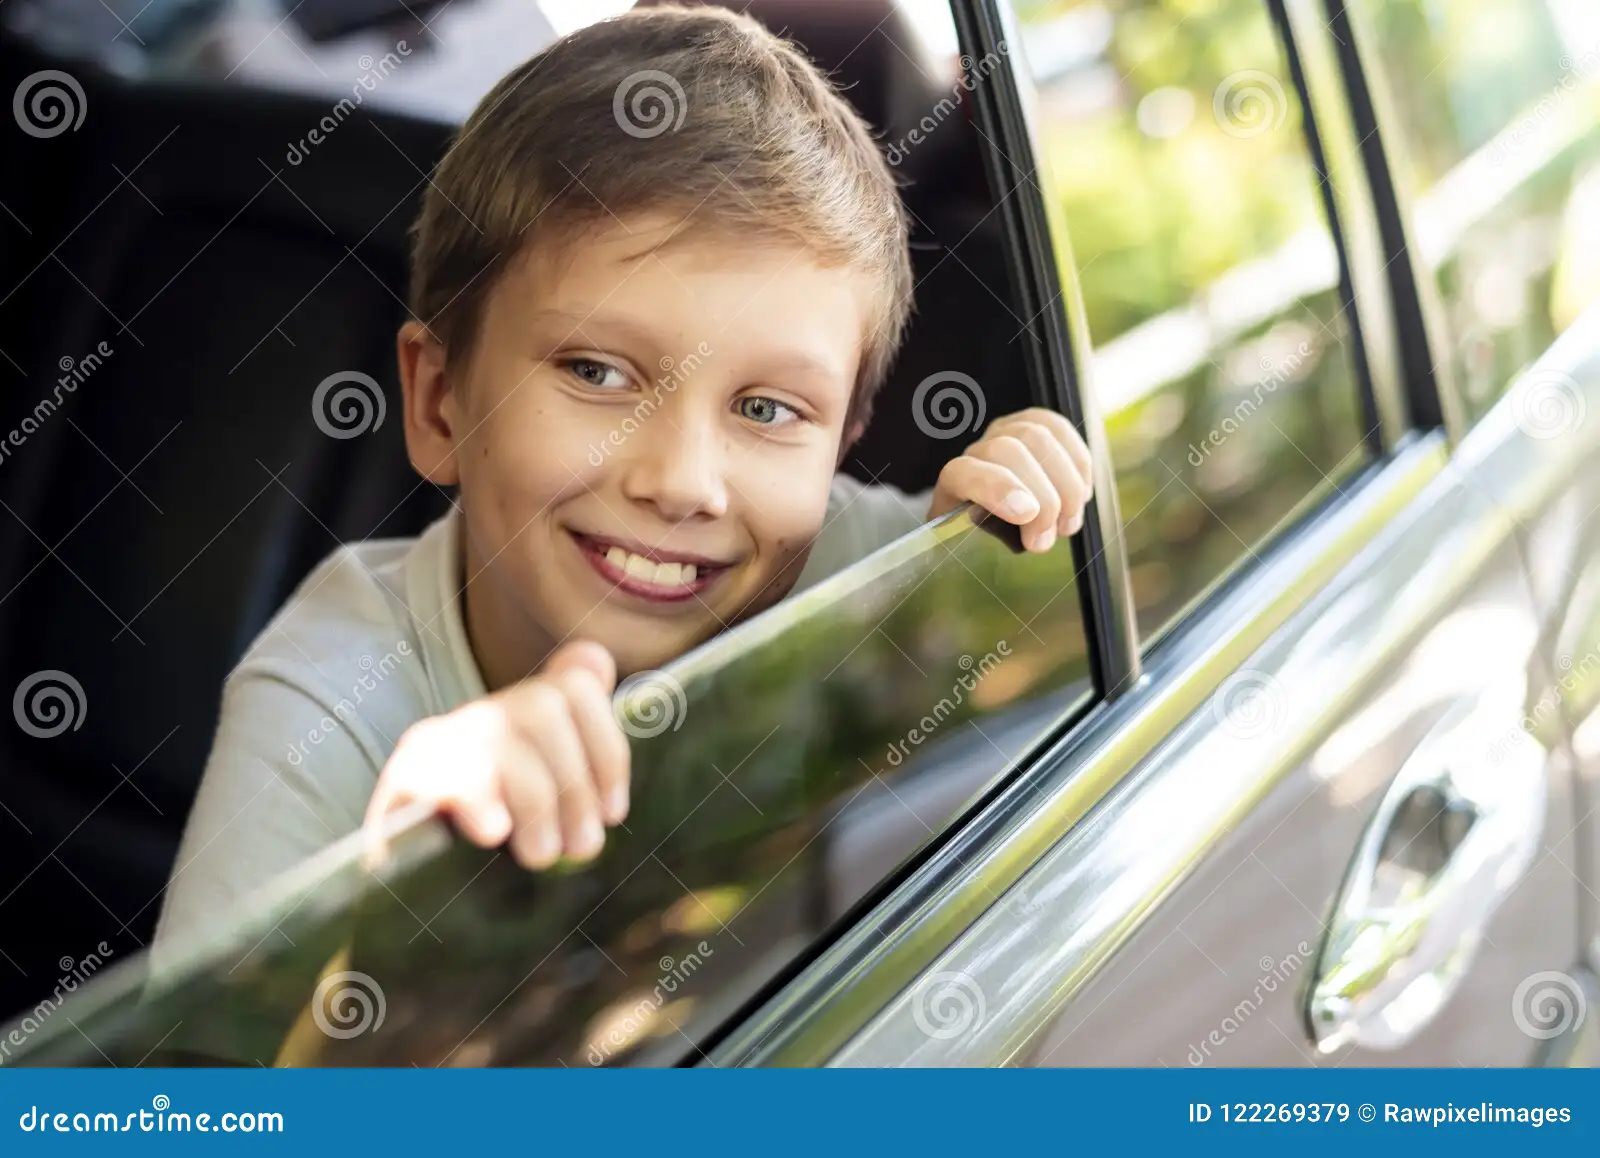 High Quality Kid Looking Out Car Window Blank Meme Template